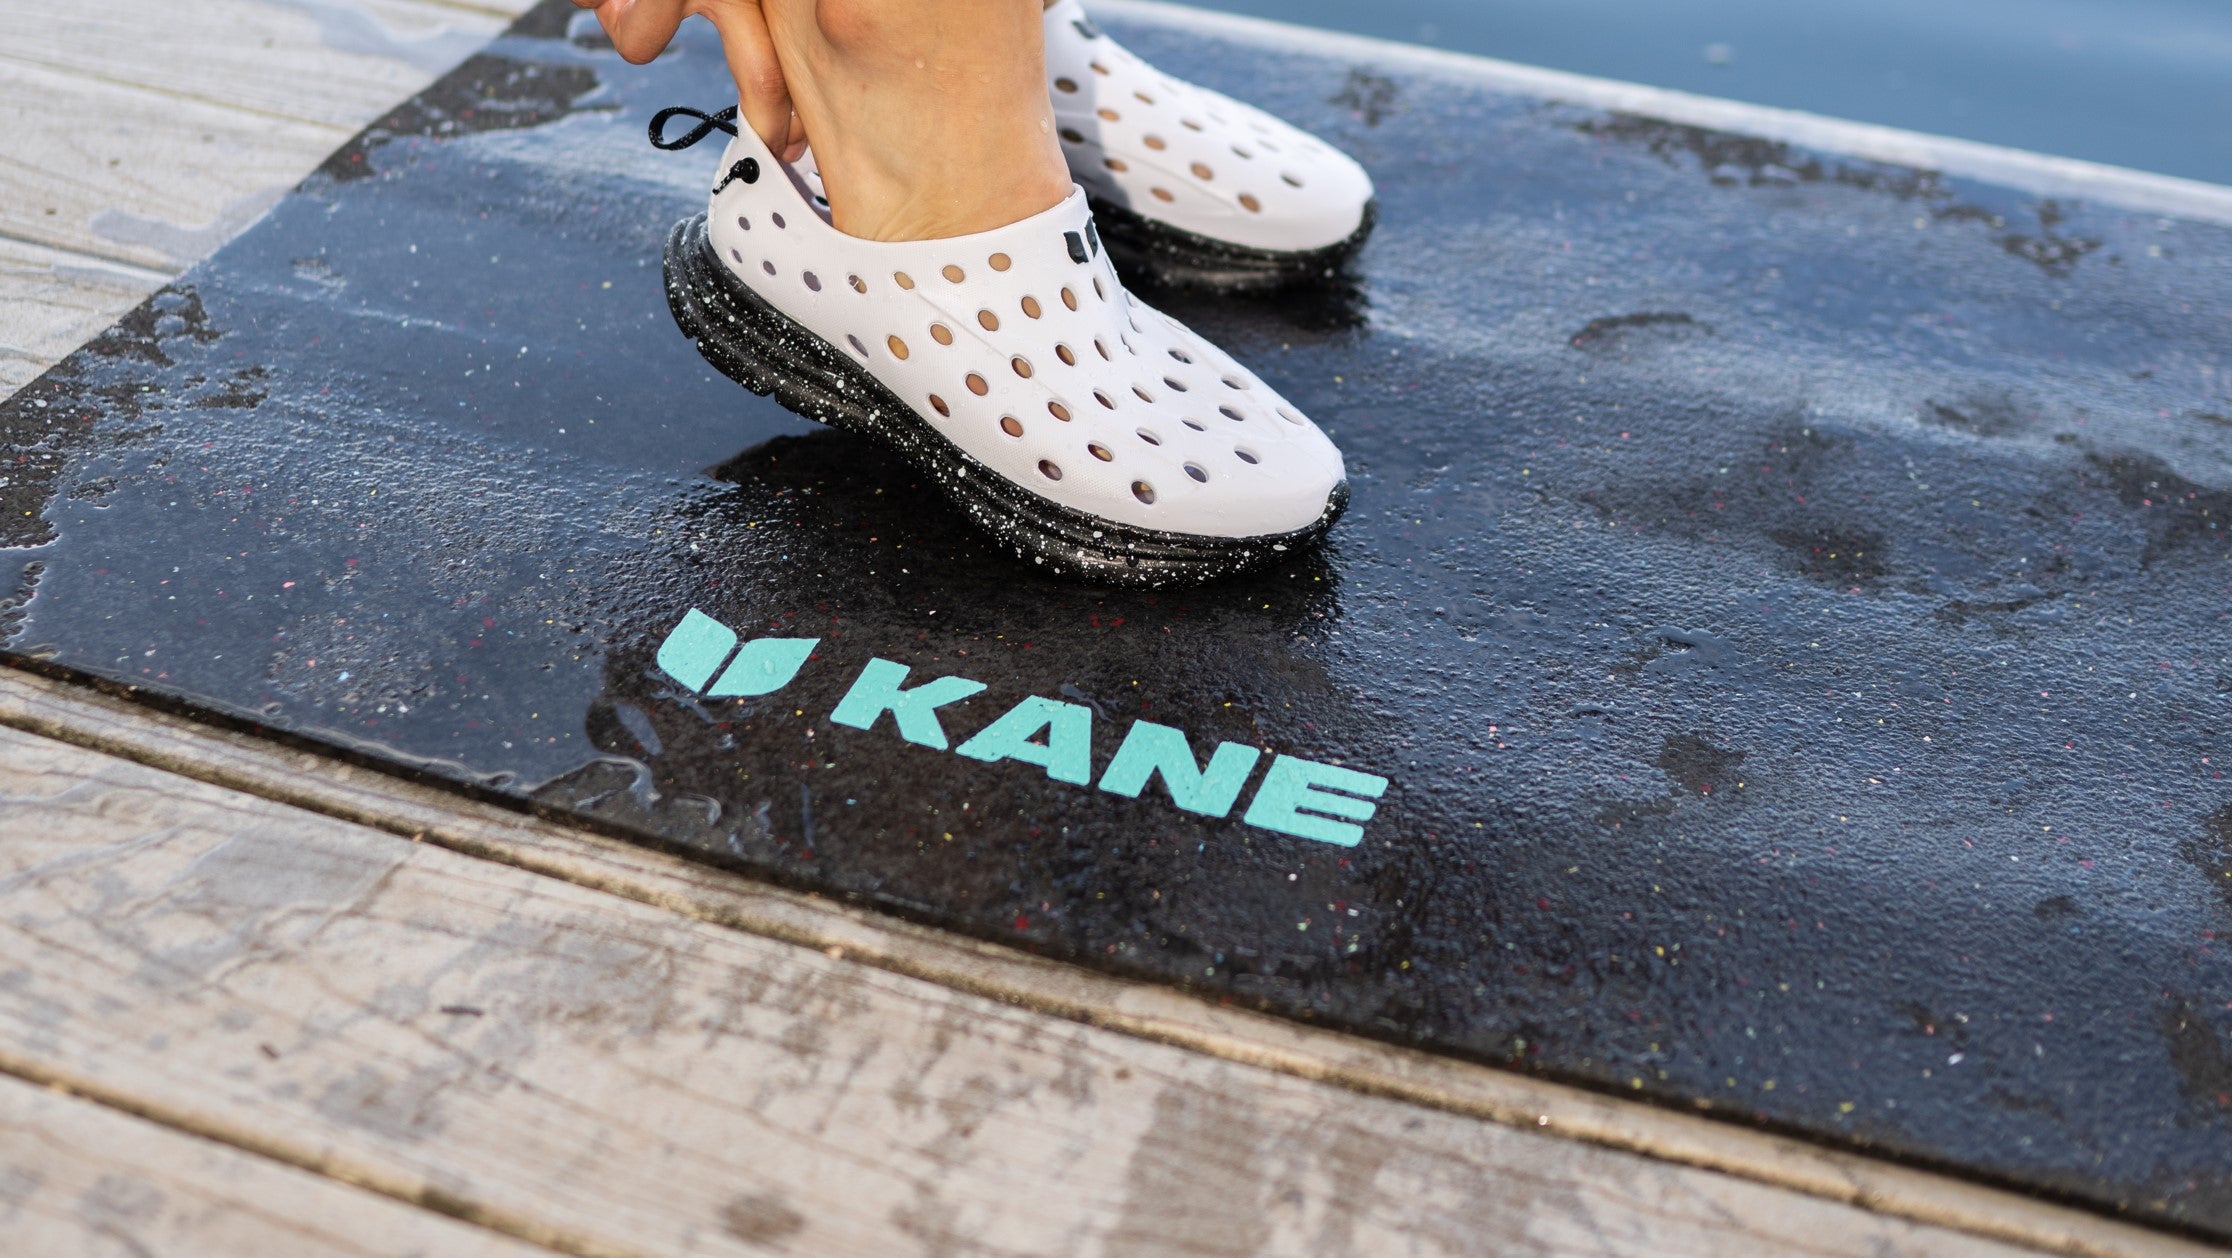 Slipping on Kane Revive shoes on top of a Kane Renew yoga mat. Placed on a wet deck to highlight the waterproof and non-slip features of Kane products.